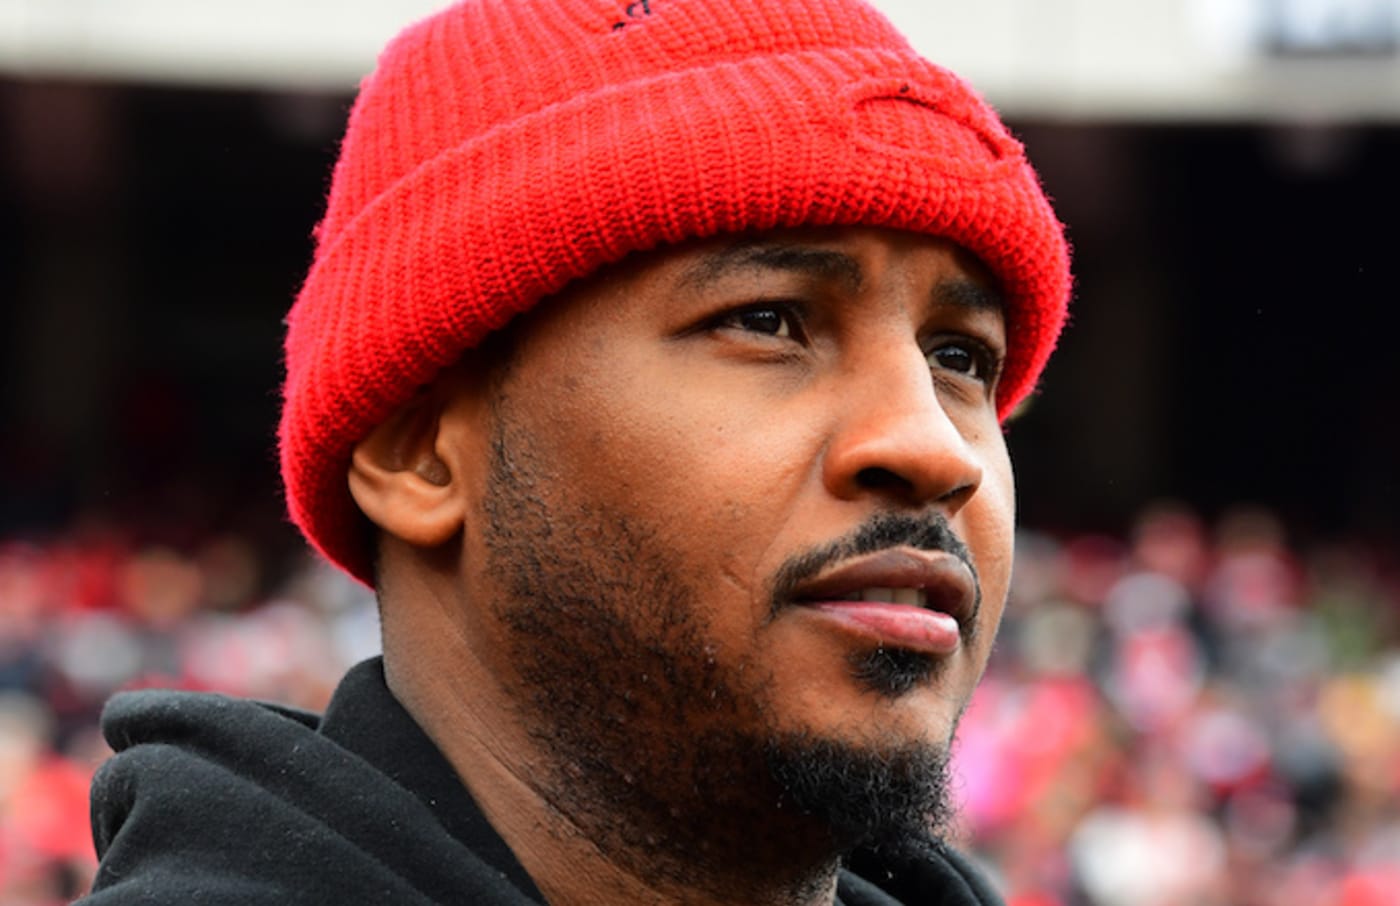 Carmelo Anthony watches game between the Georgia Bulldogs and the Georgia Tech Yellow Jackets.